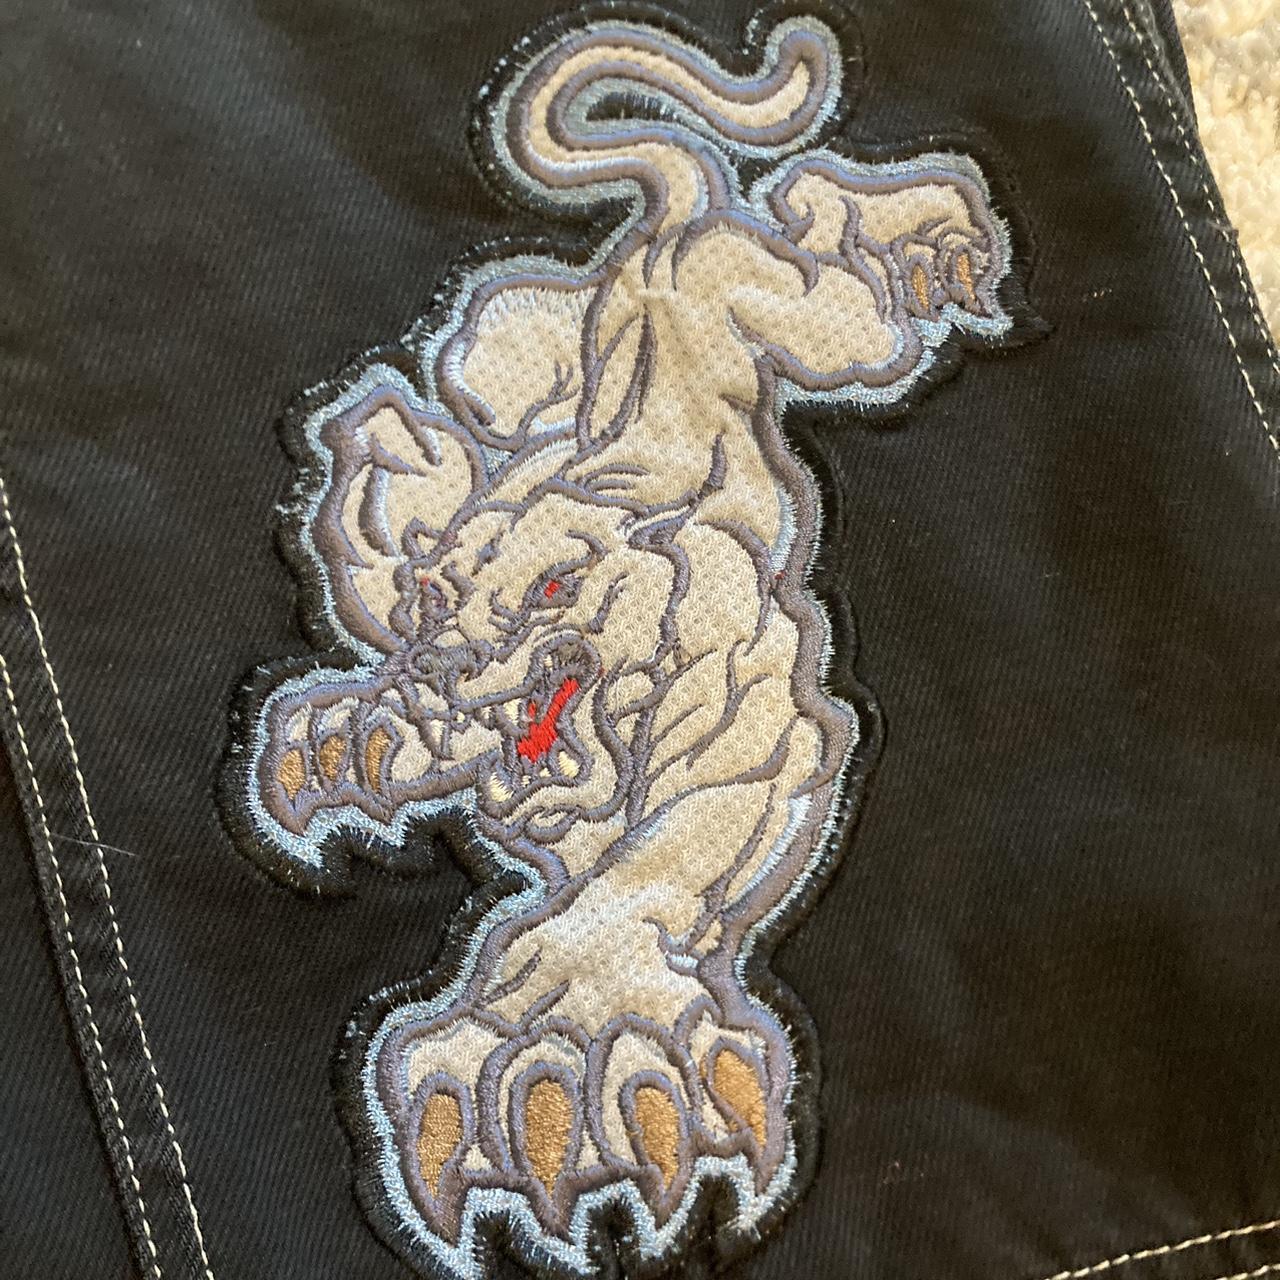 RARE #jnco white panther jeans/ jorts. These things... - Depop